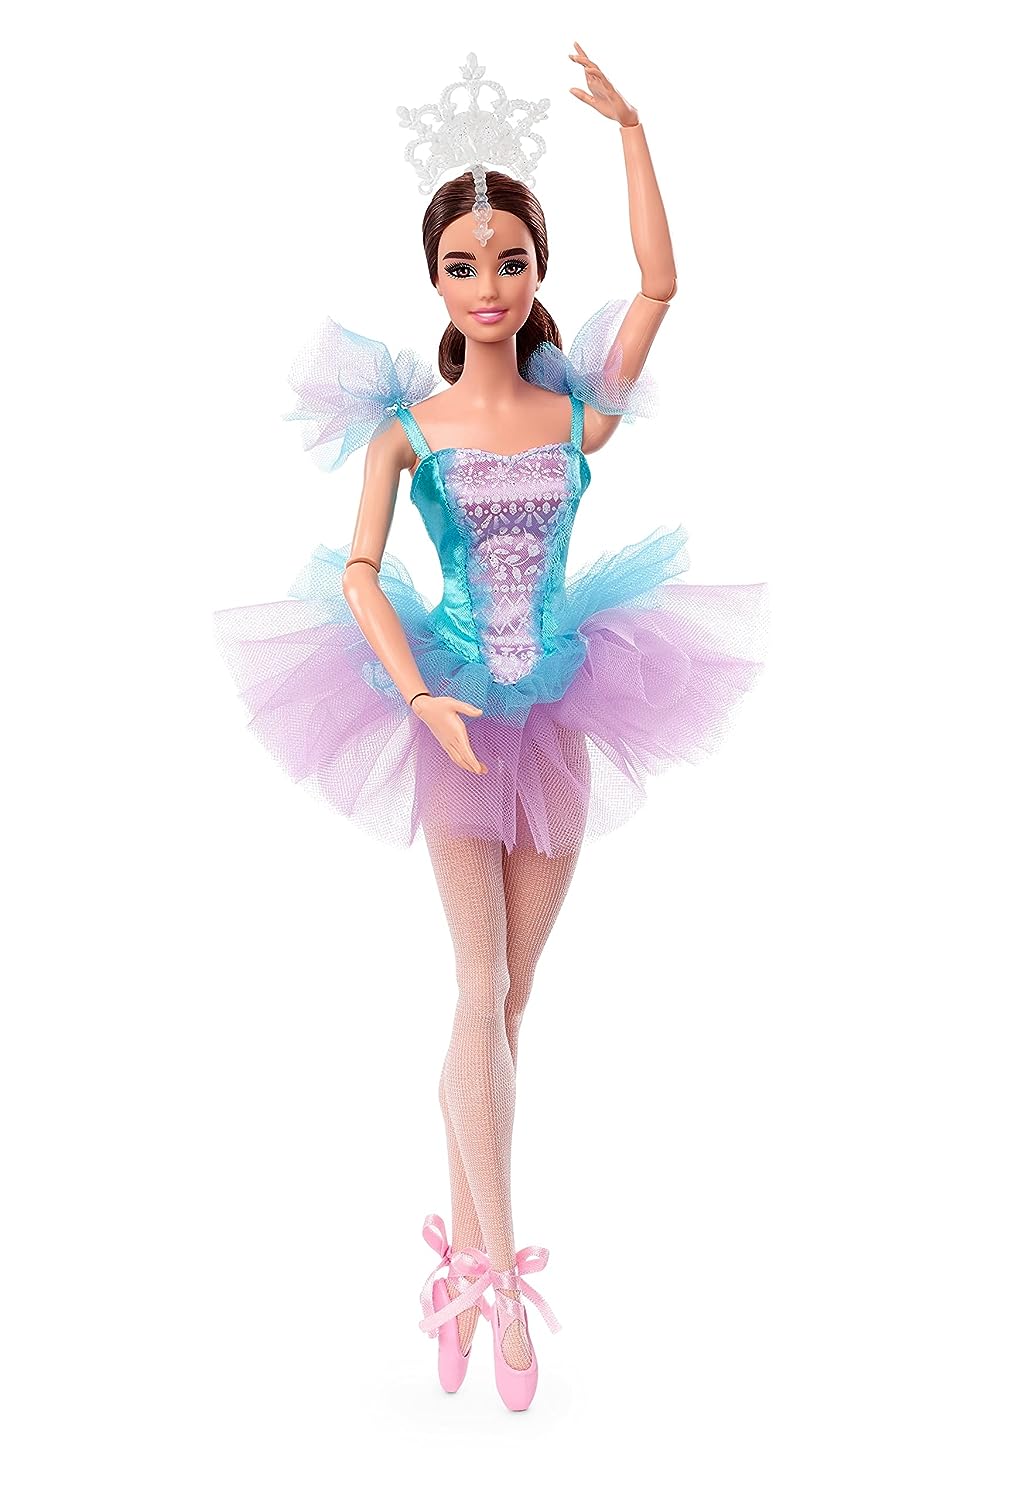 Barbie 12 Inch Signature Ballet Wishes Doll Wearing Ballerina Costume, Tutu, Pointe Shoes & Tiara for 6 Year Olds and Up